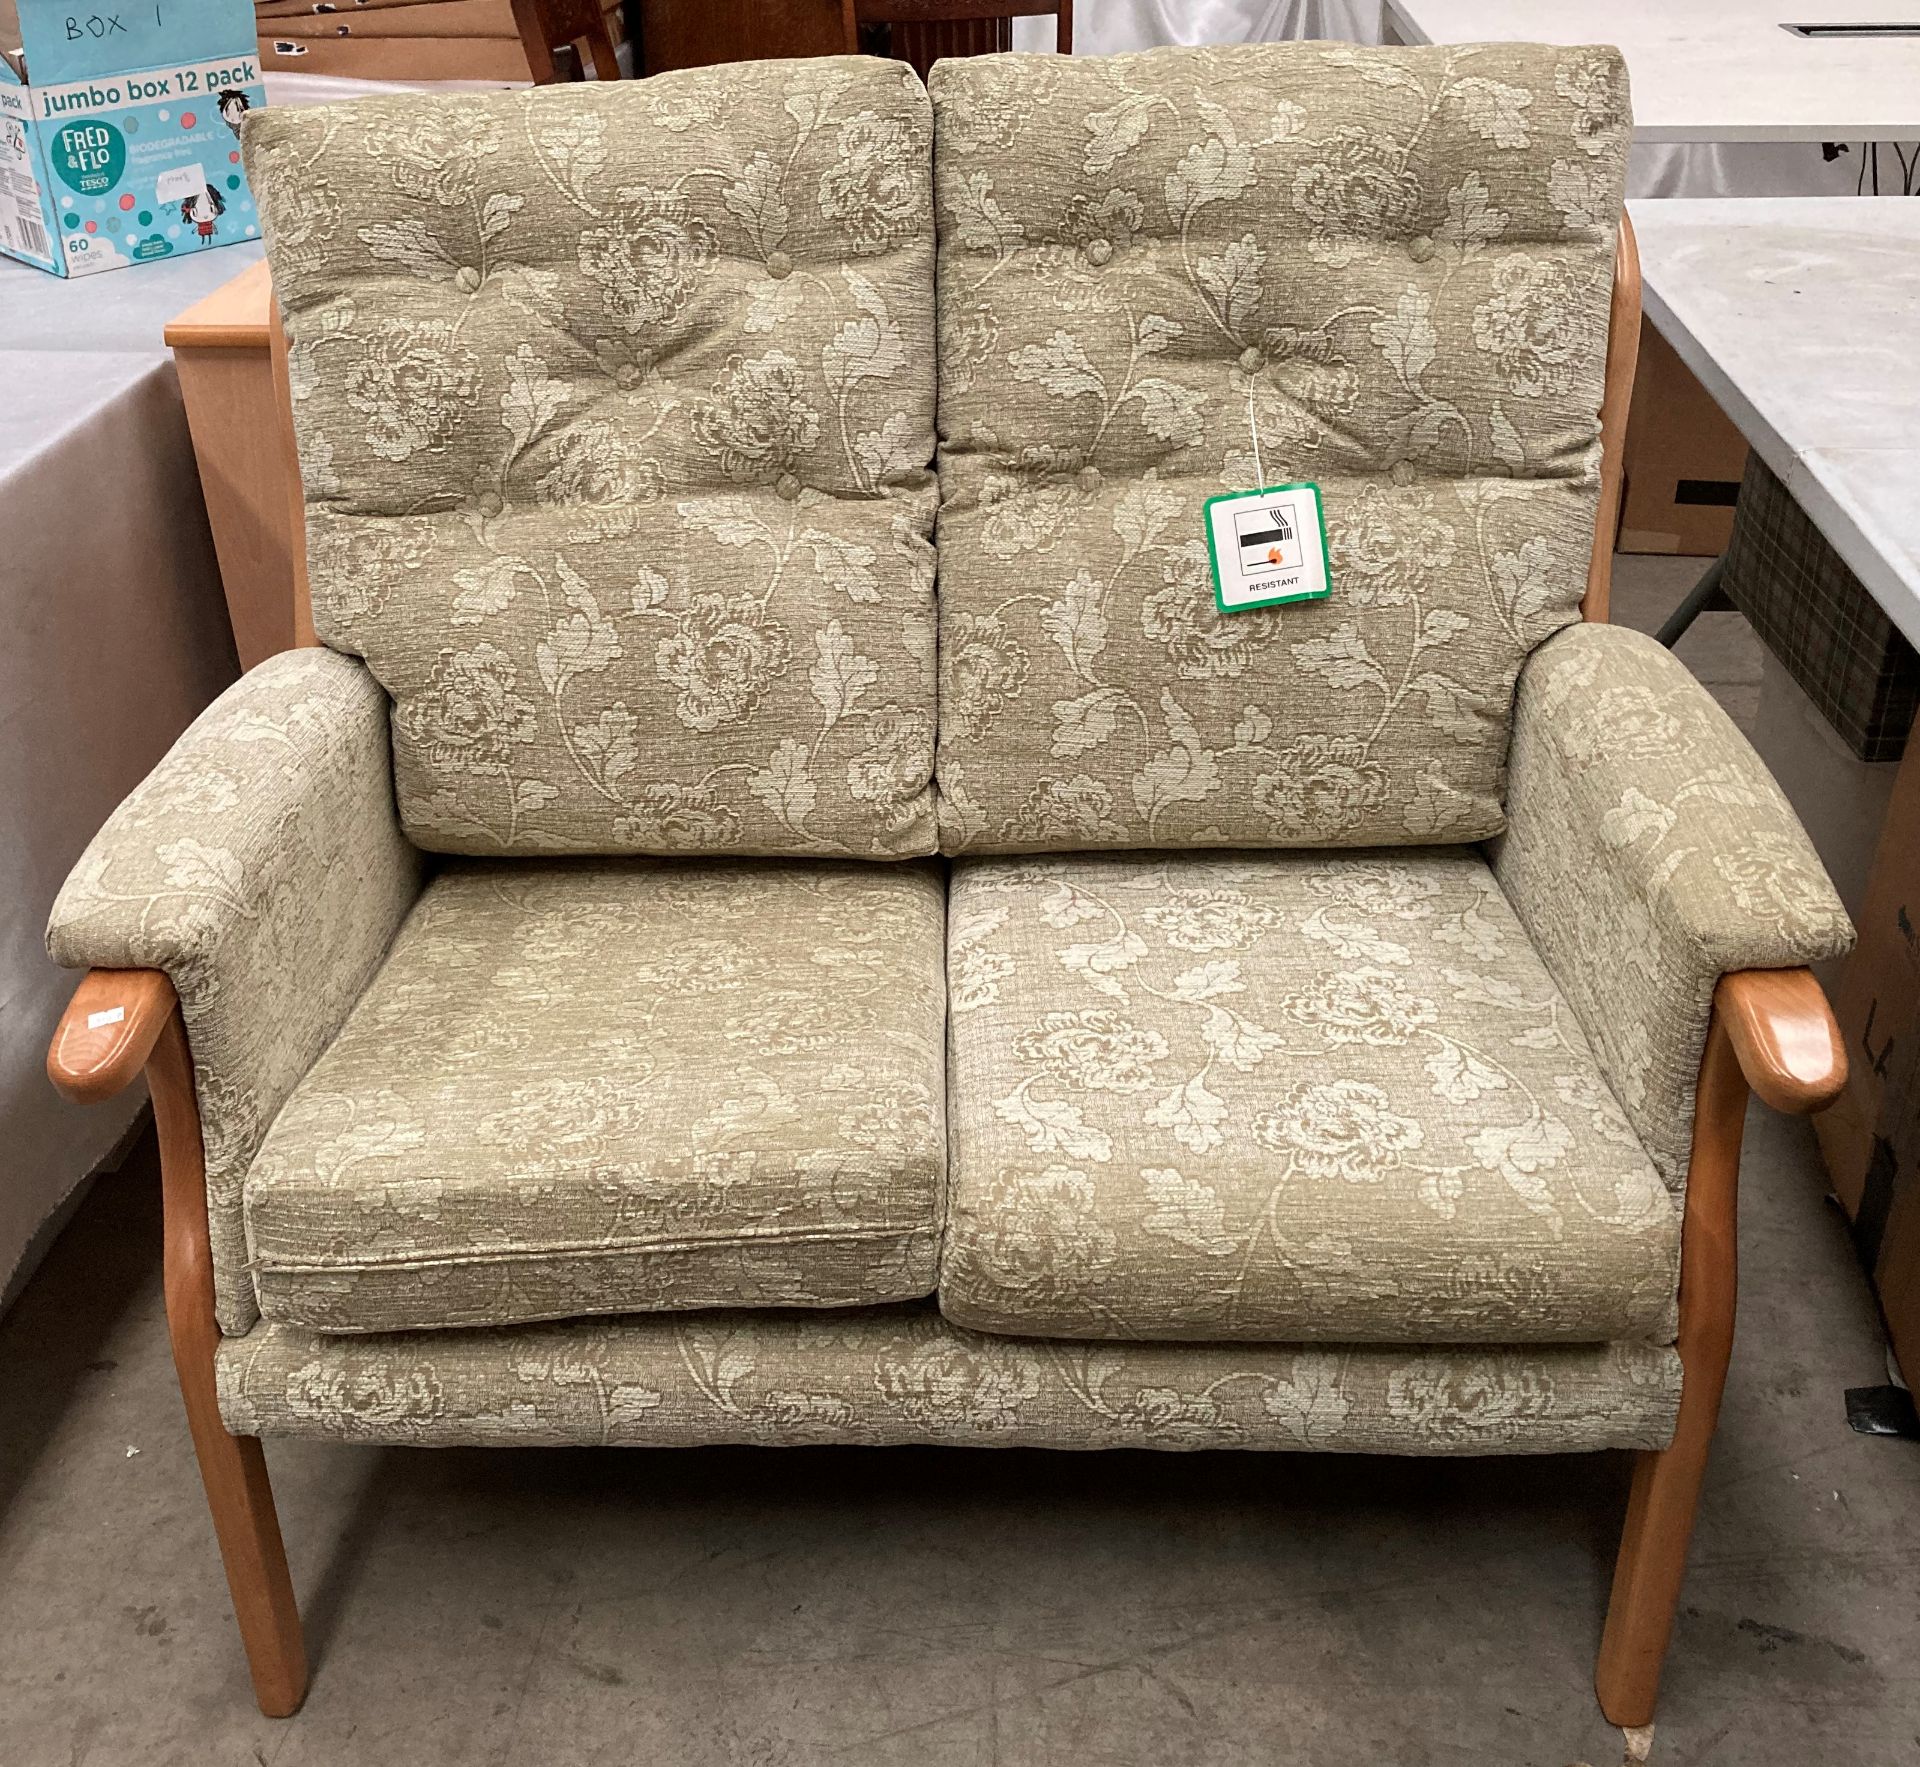 Beige material floral patterned 2 seater high back settee